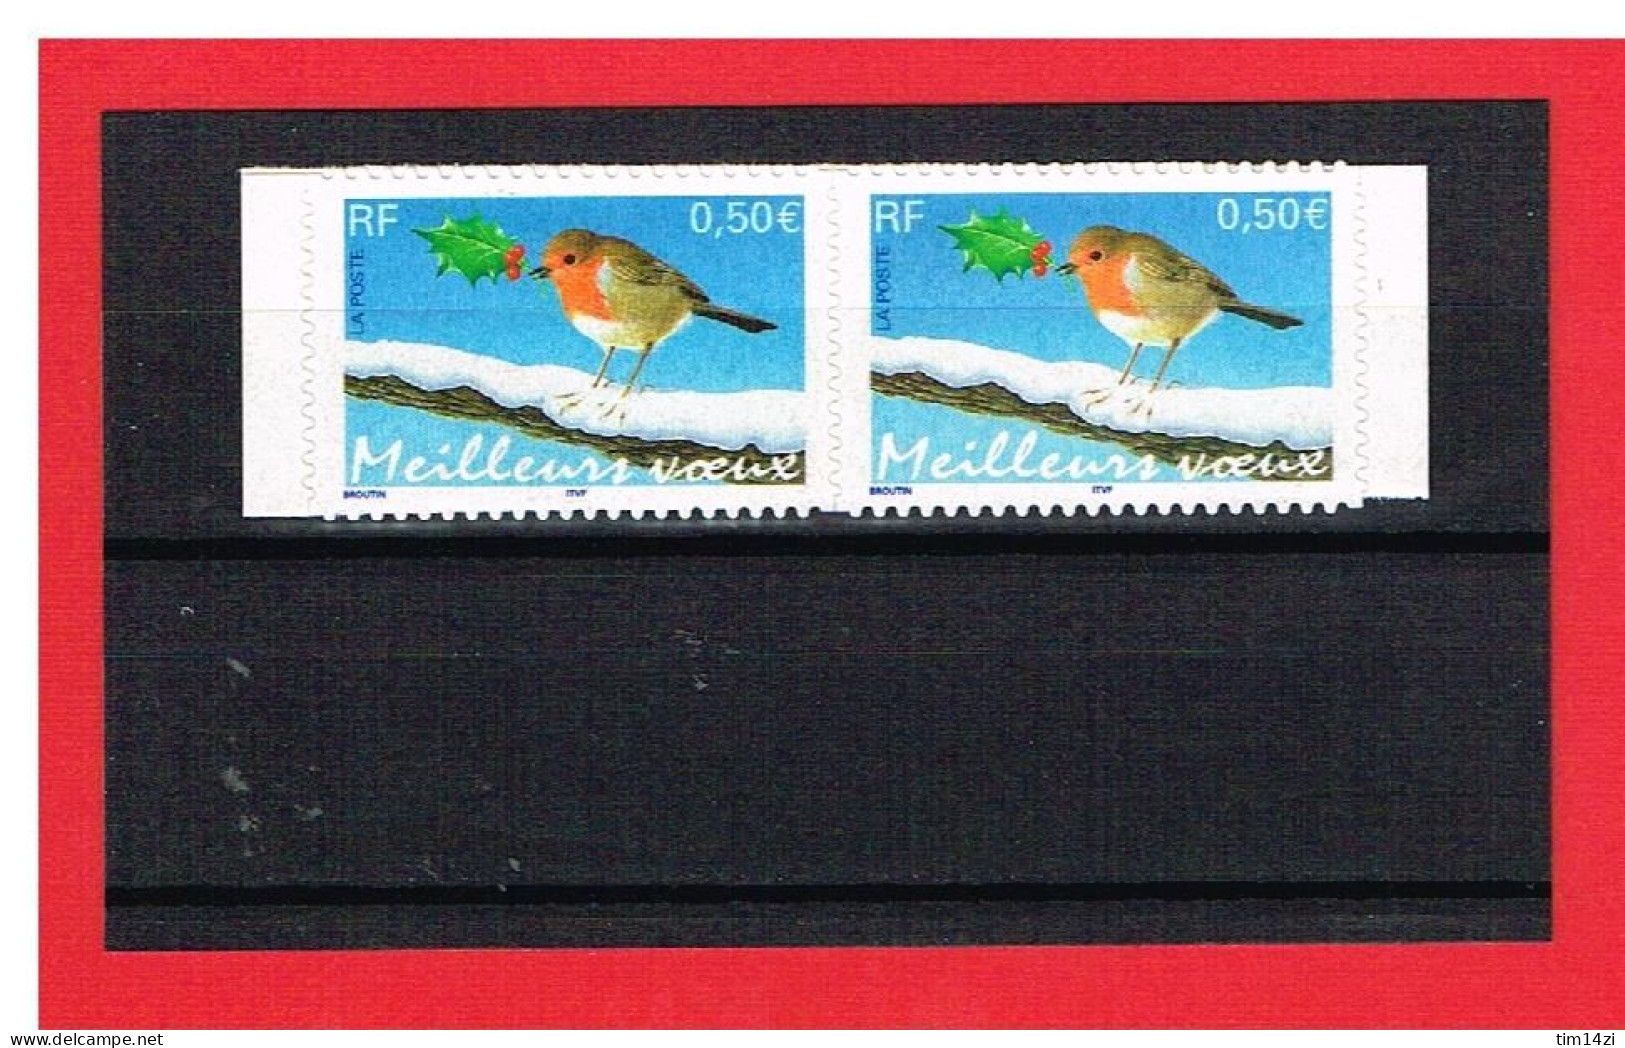 FRANCE - 2003 -  ADHESIFS** -  2 TIMBRES - N°37 Ou N°3622  -  MEILLEURS VOEUX - Y & T - COTE 3.20 € - Unused Stamps